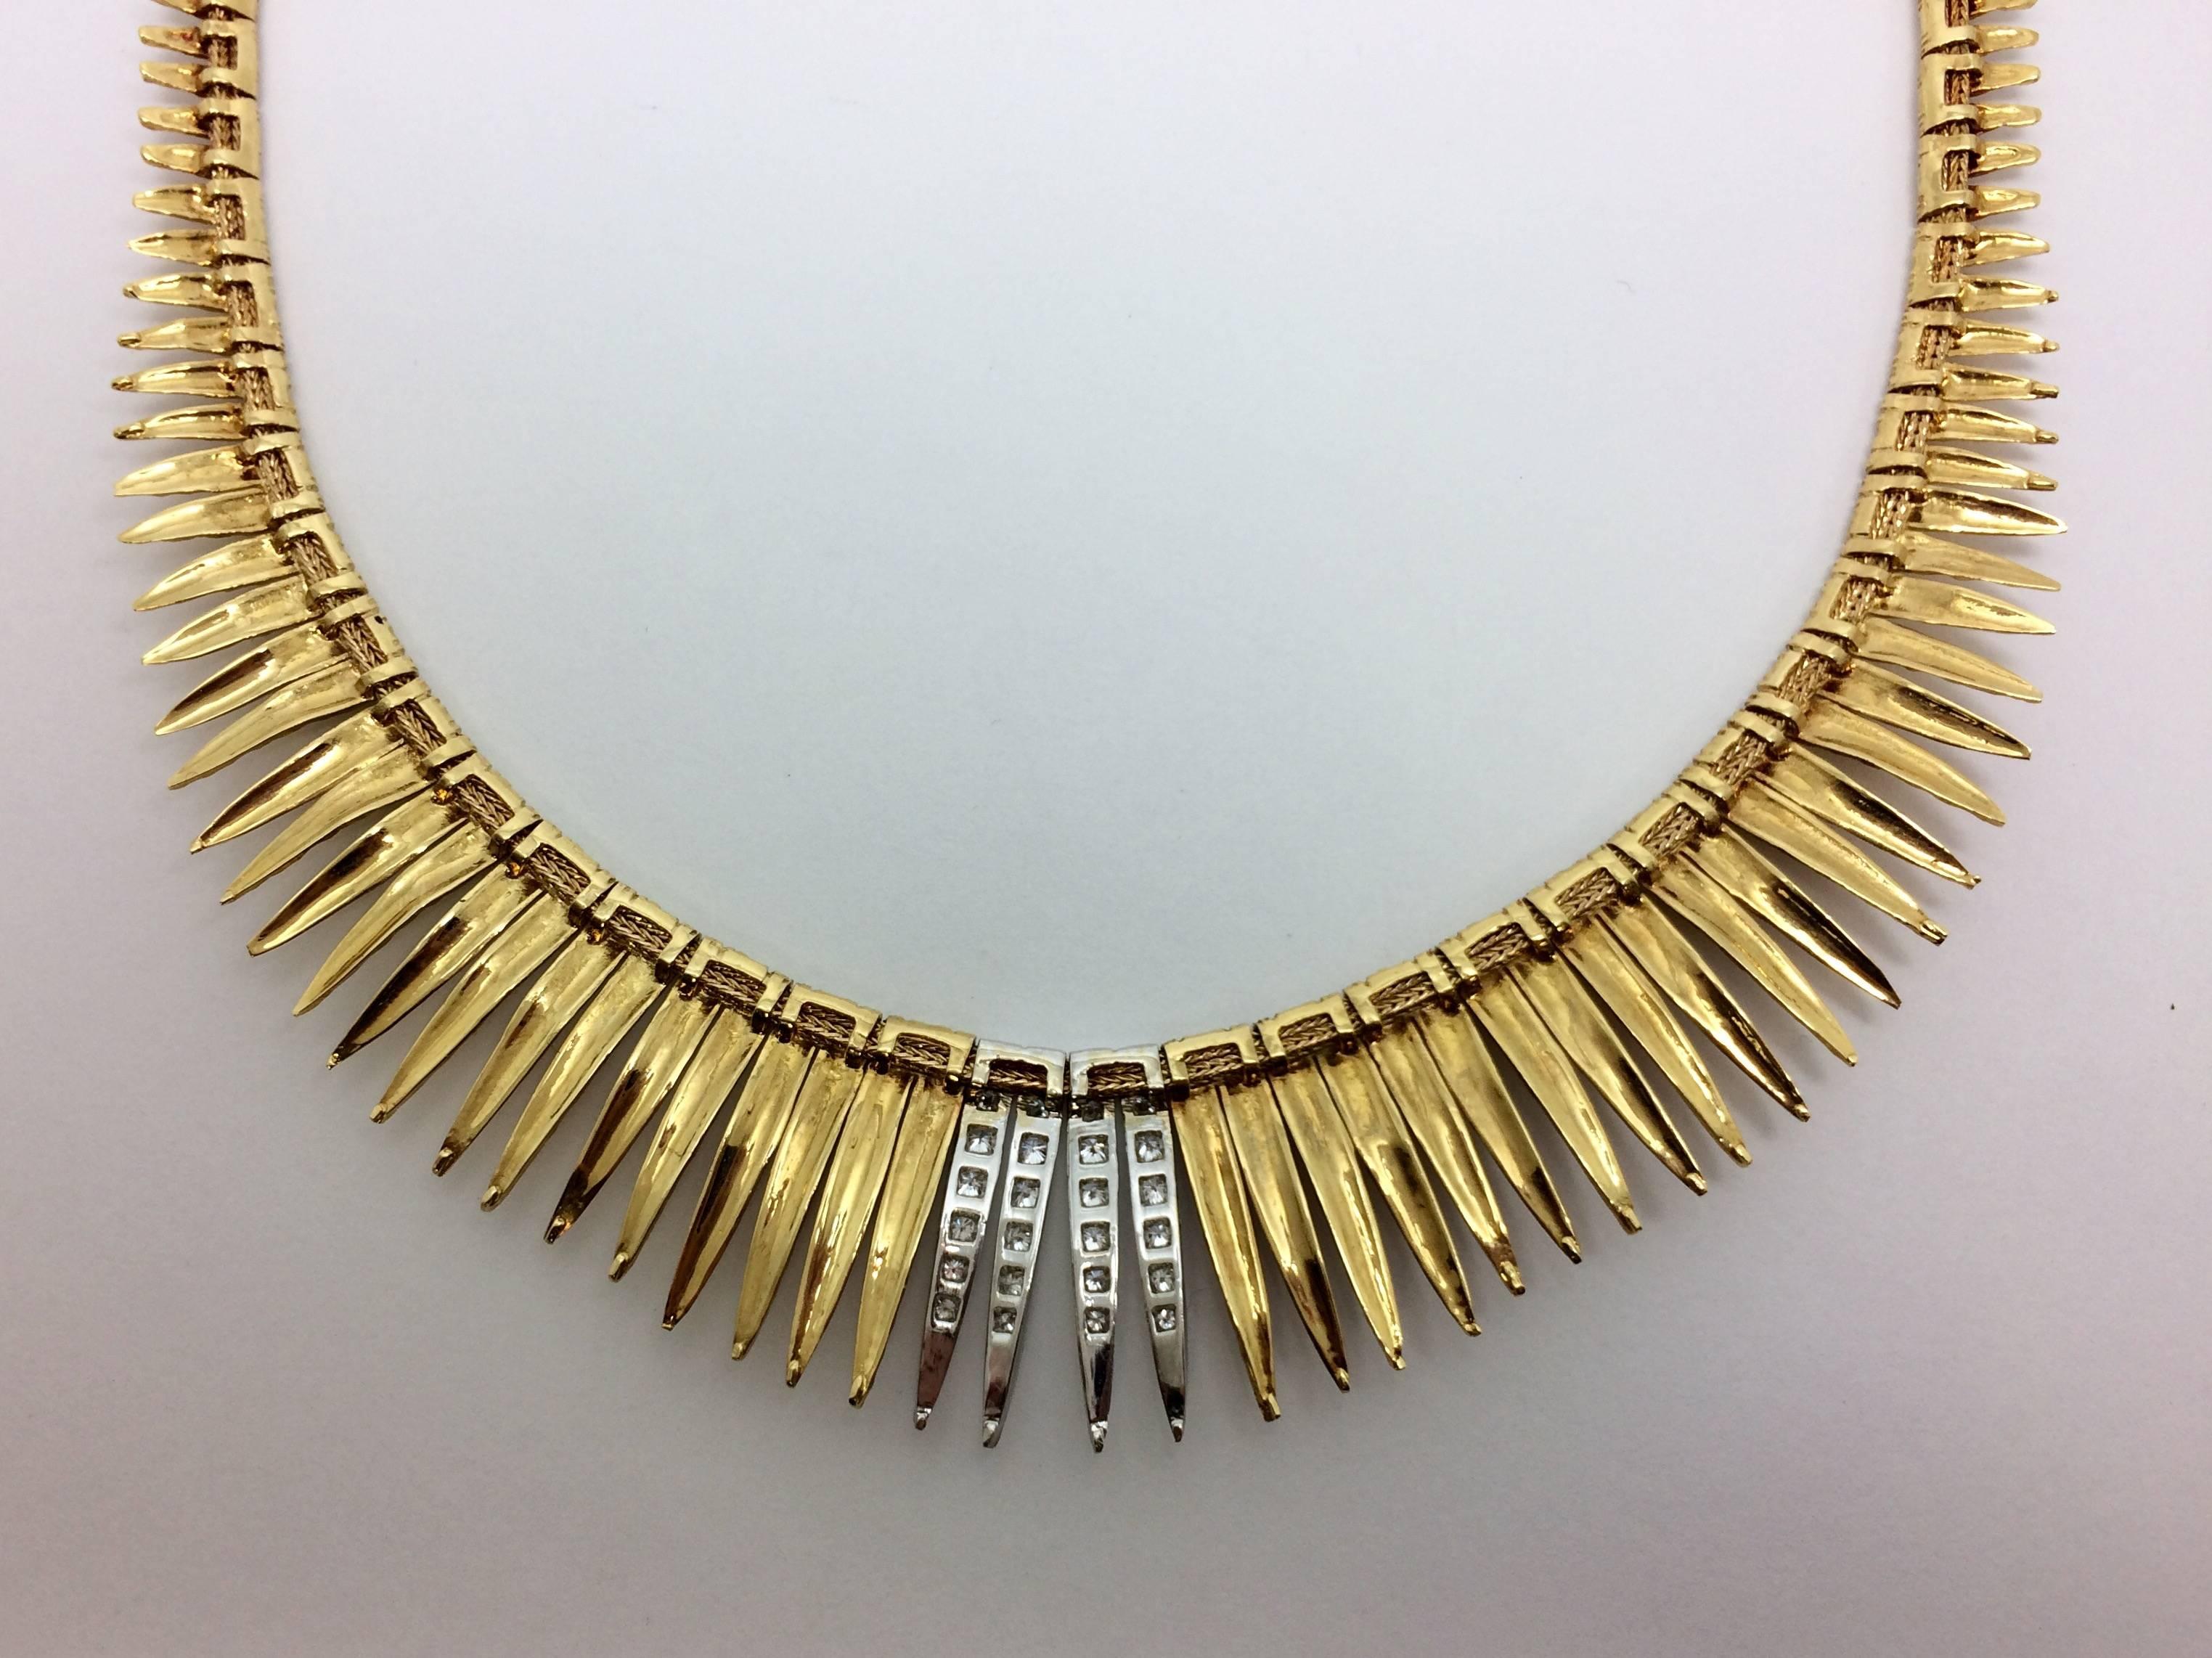 One 18kt yellow gold and diamond collar style style necklace.  This pre-owned piece certainly makes a statement.  It is graduated as it goes down and lays flat on the upper décolletage. Diamonds adorn the center four links. Measuring approximately